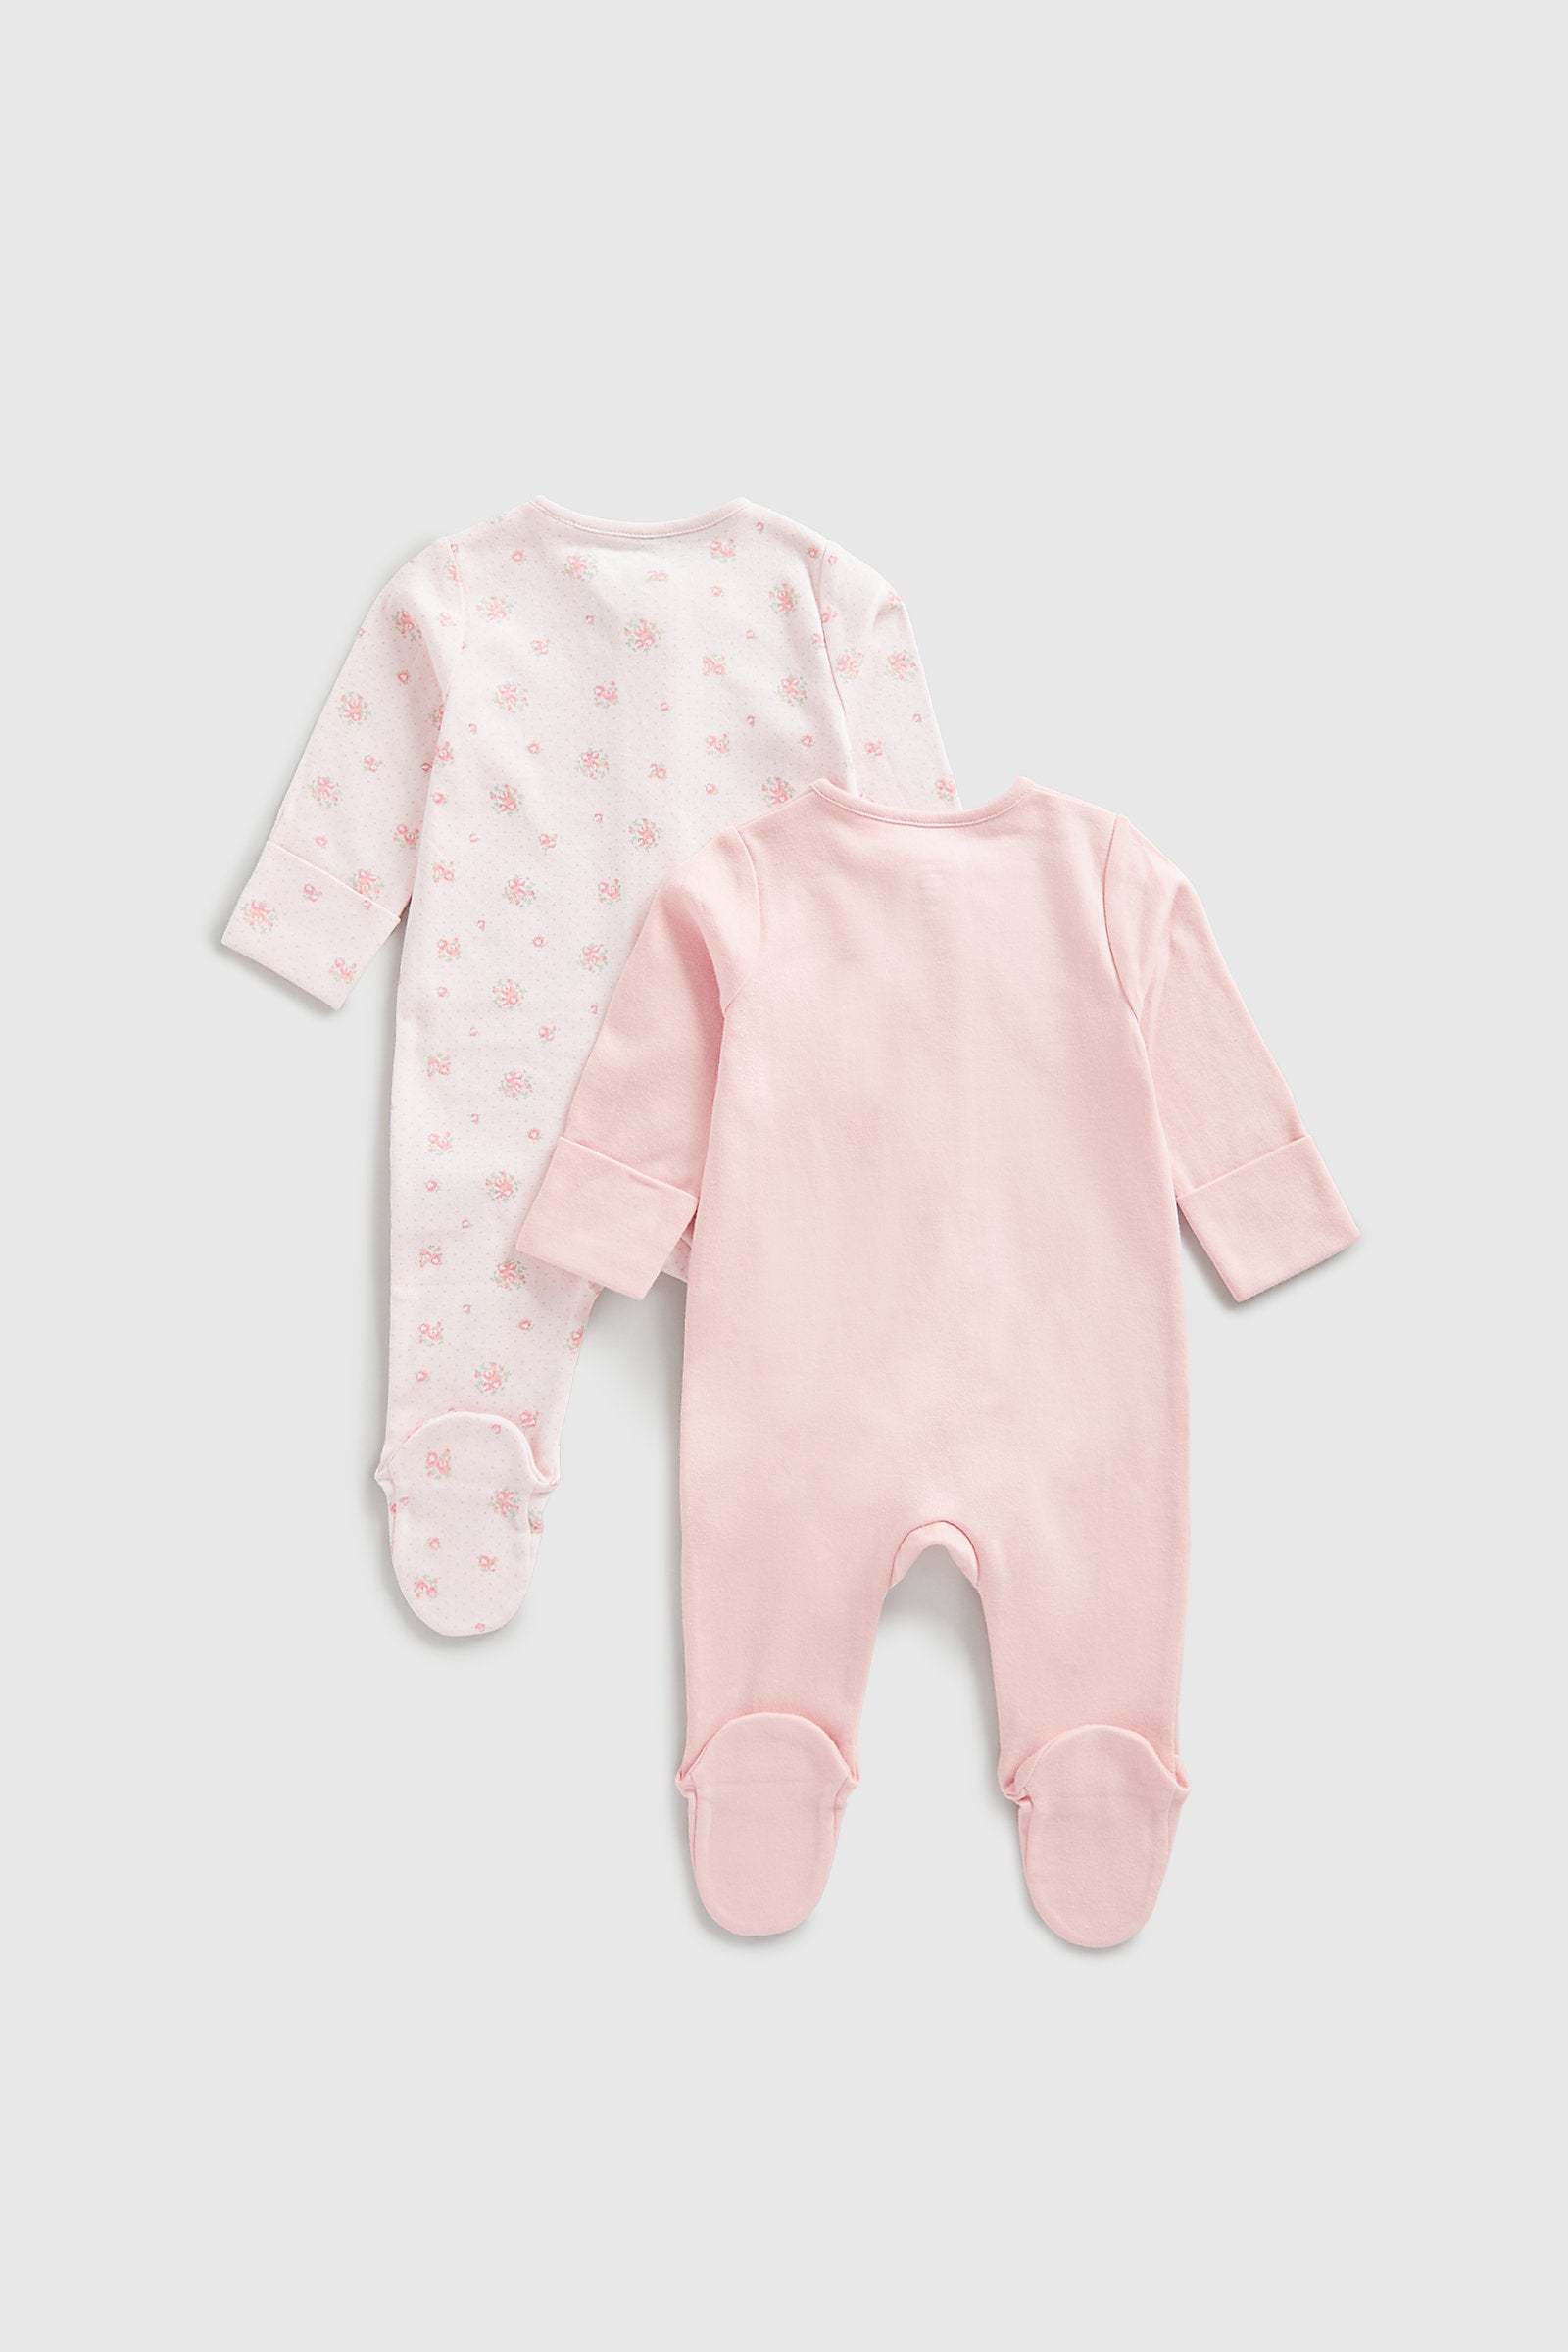 Mothercare Floral Zip-Up Baby Sleepsuits - 2 Pack